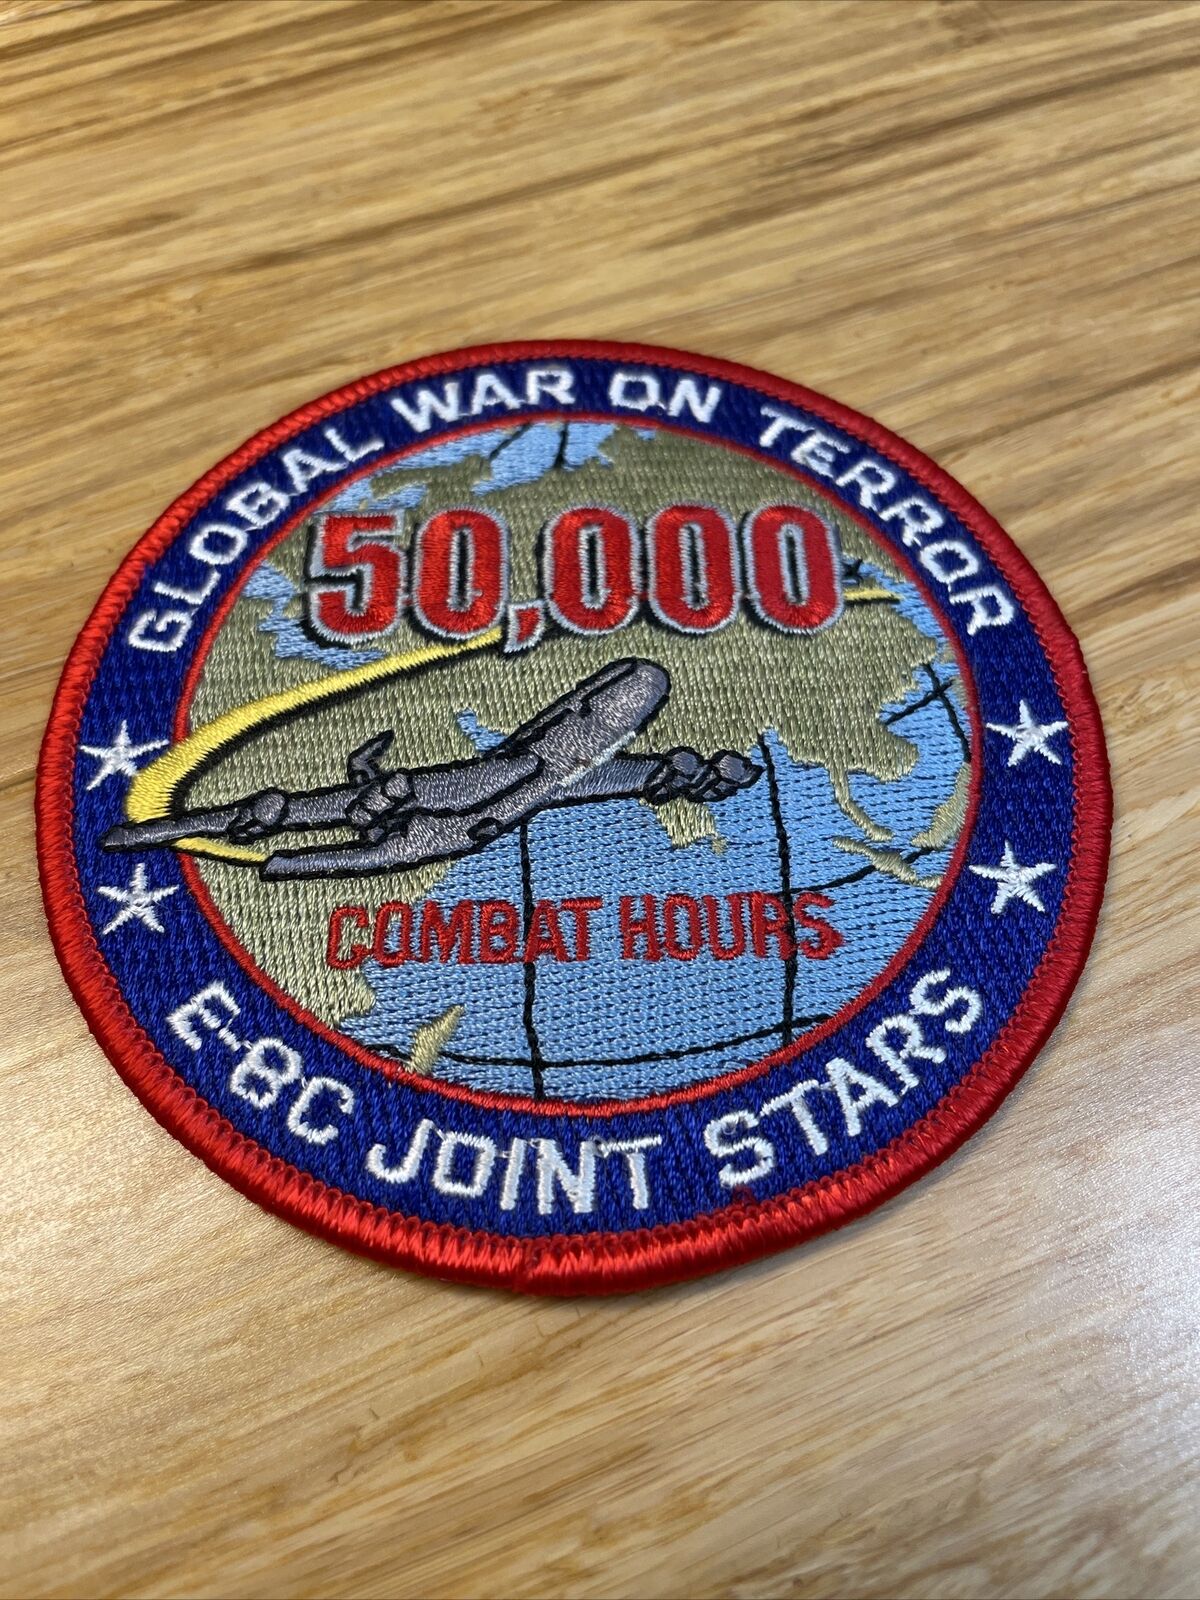 Global War on Terror E-8C Joint Stars 50,000 Combat Hours Patch KG